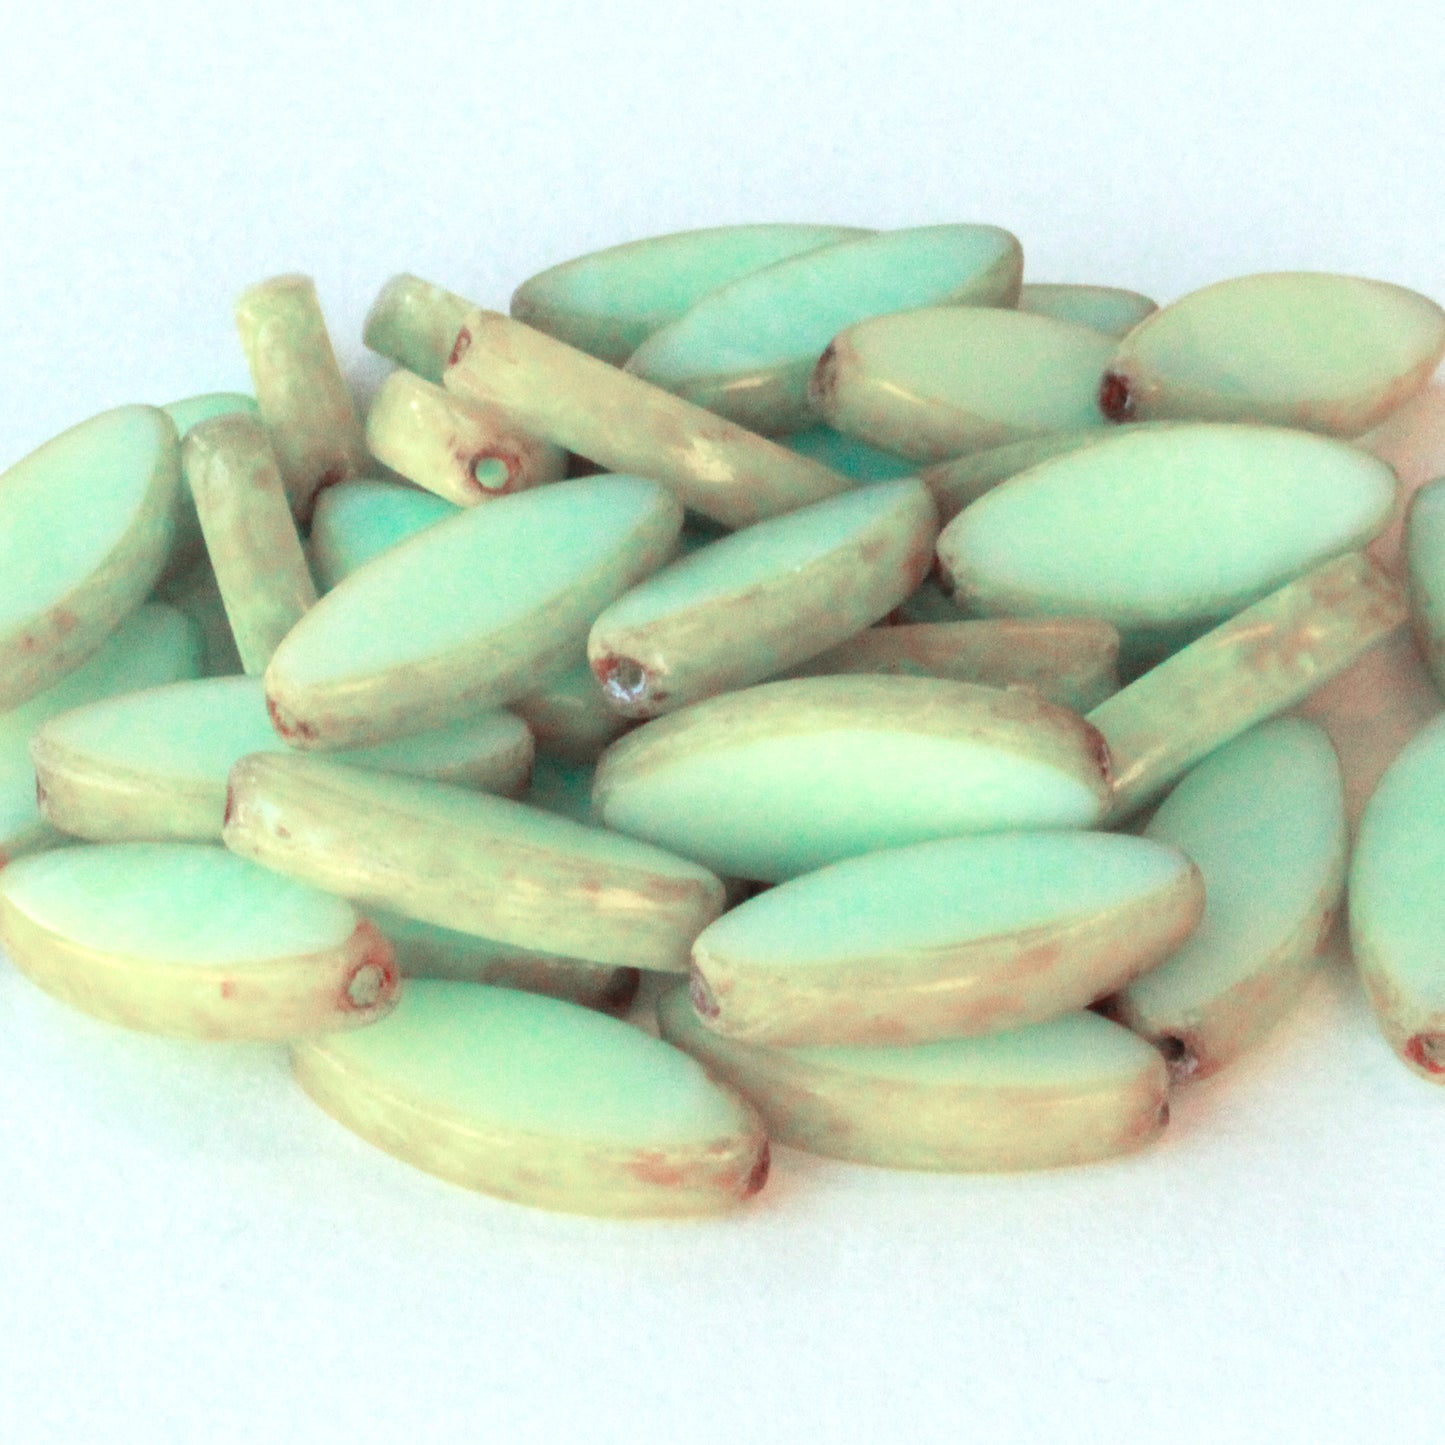 18mm Spindle Beads - Light Green Picasso - 10 beads